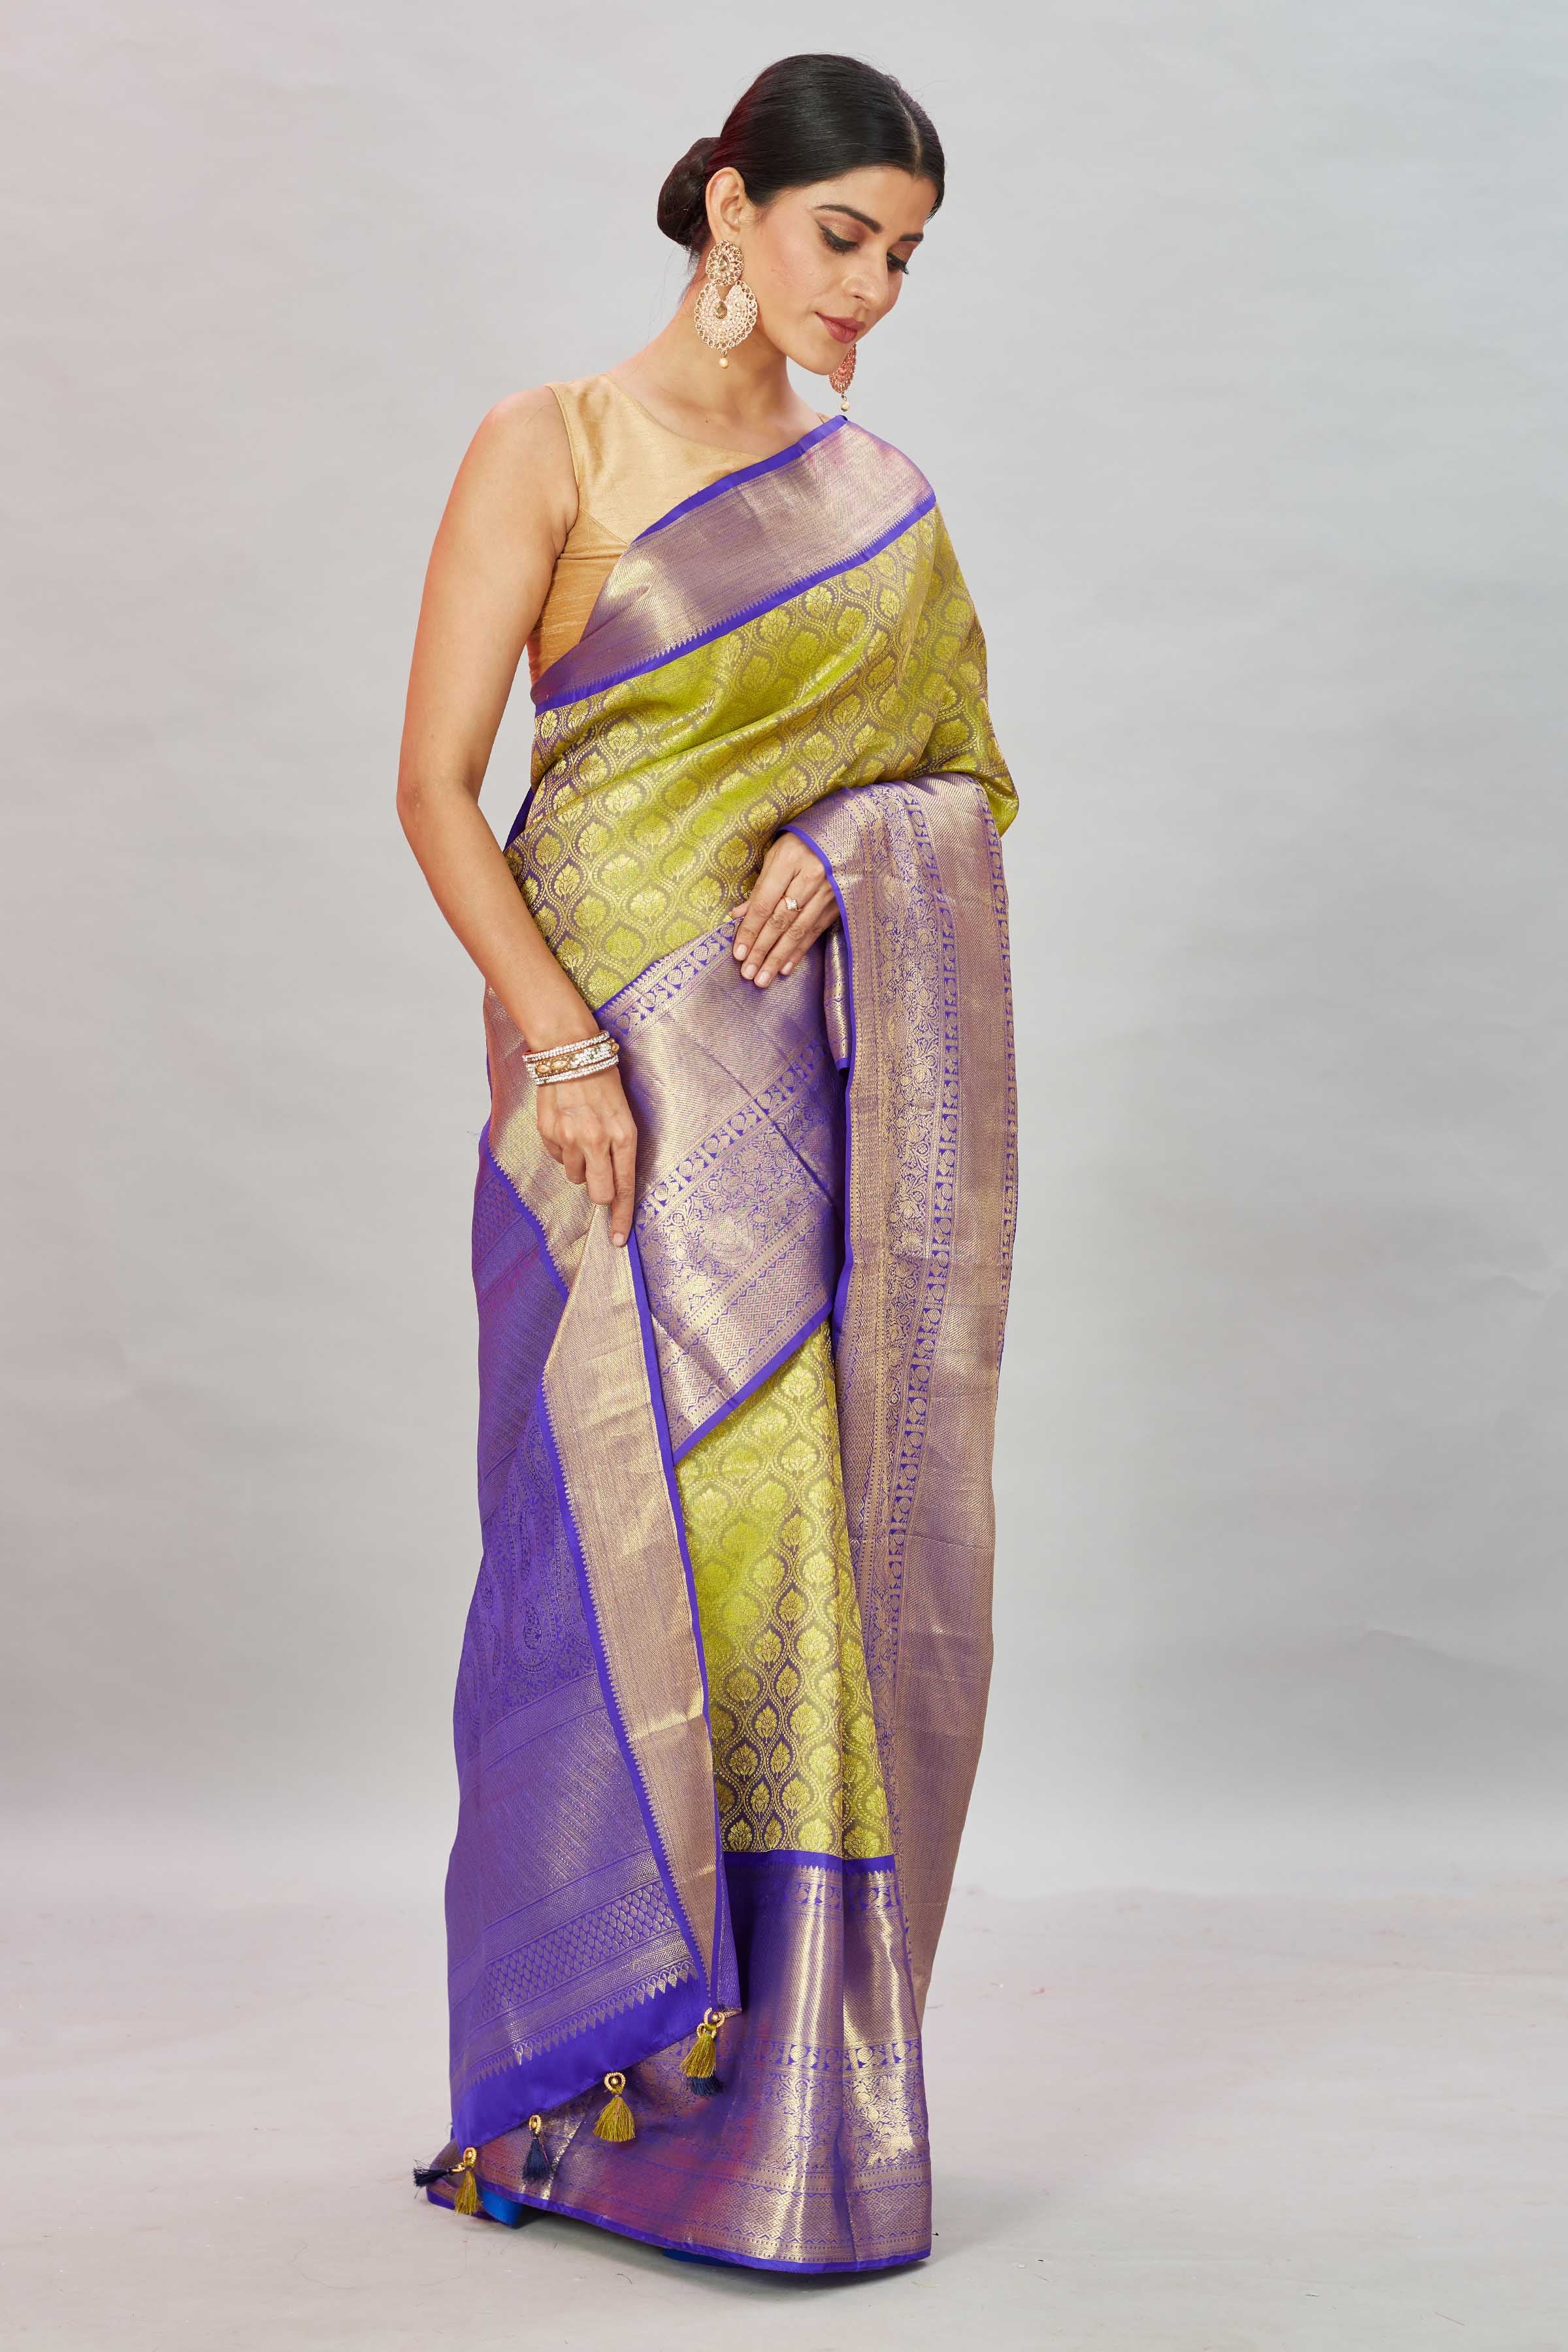 Shop pista  green Kanjivaram silk sari online in USA with purple border. Look your best on festive occasions in latest designer sarees, pure silk sarees, Kanjivaram silk saris, handwoven saris, tussar silk sarees, embroidered saris from Pure Elegance Indian clothing store in USA.-side